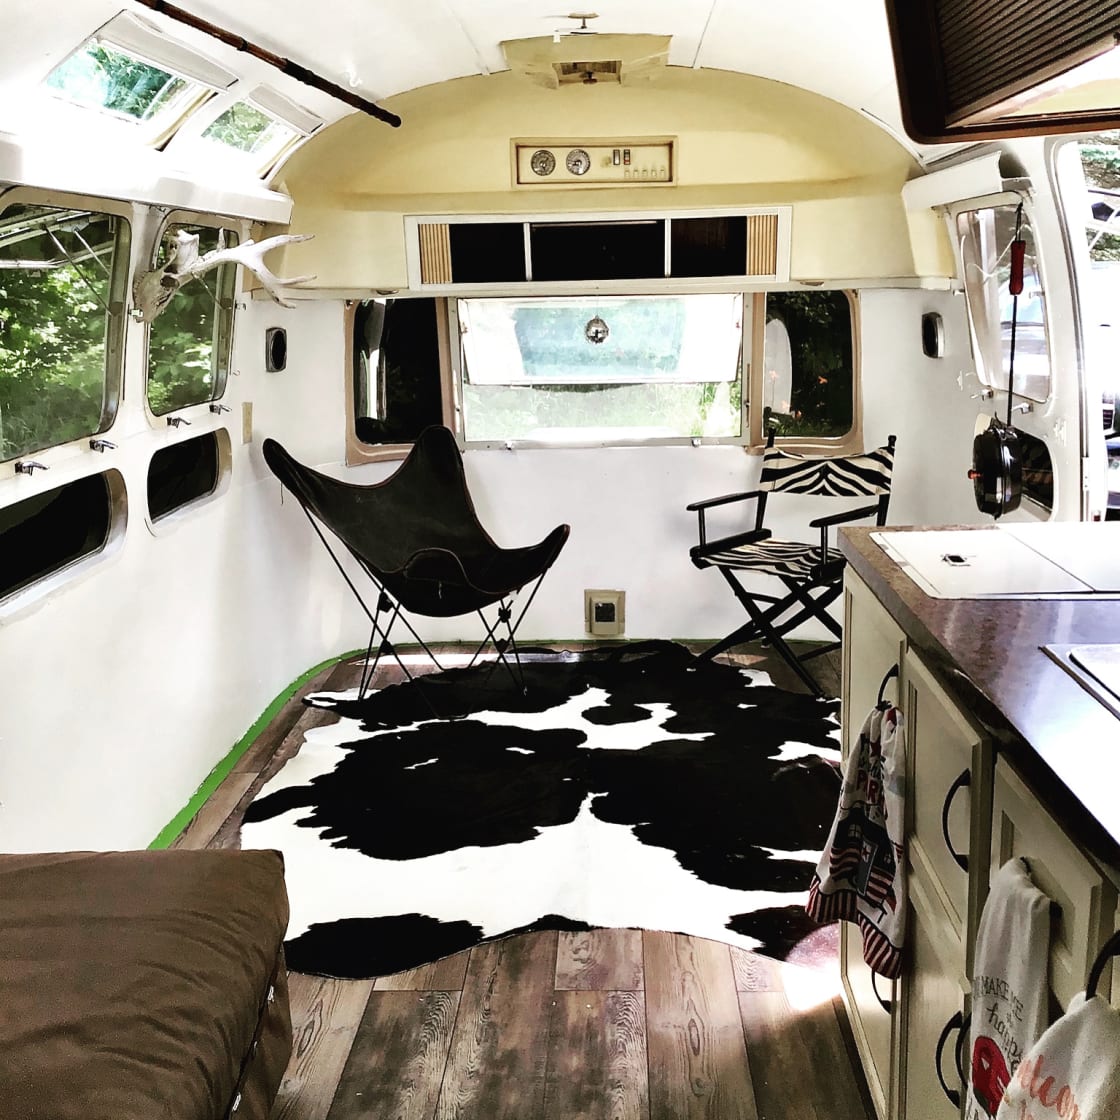 This is what the airstream looks like inside now I have two twin beds and then I bring in the blowup air mattress it's a double that you can put right down there where the chairs are and I have a grill, coolers, coffee pot, toaster, utensils!